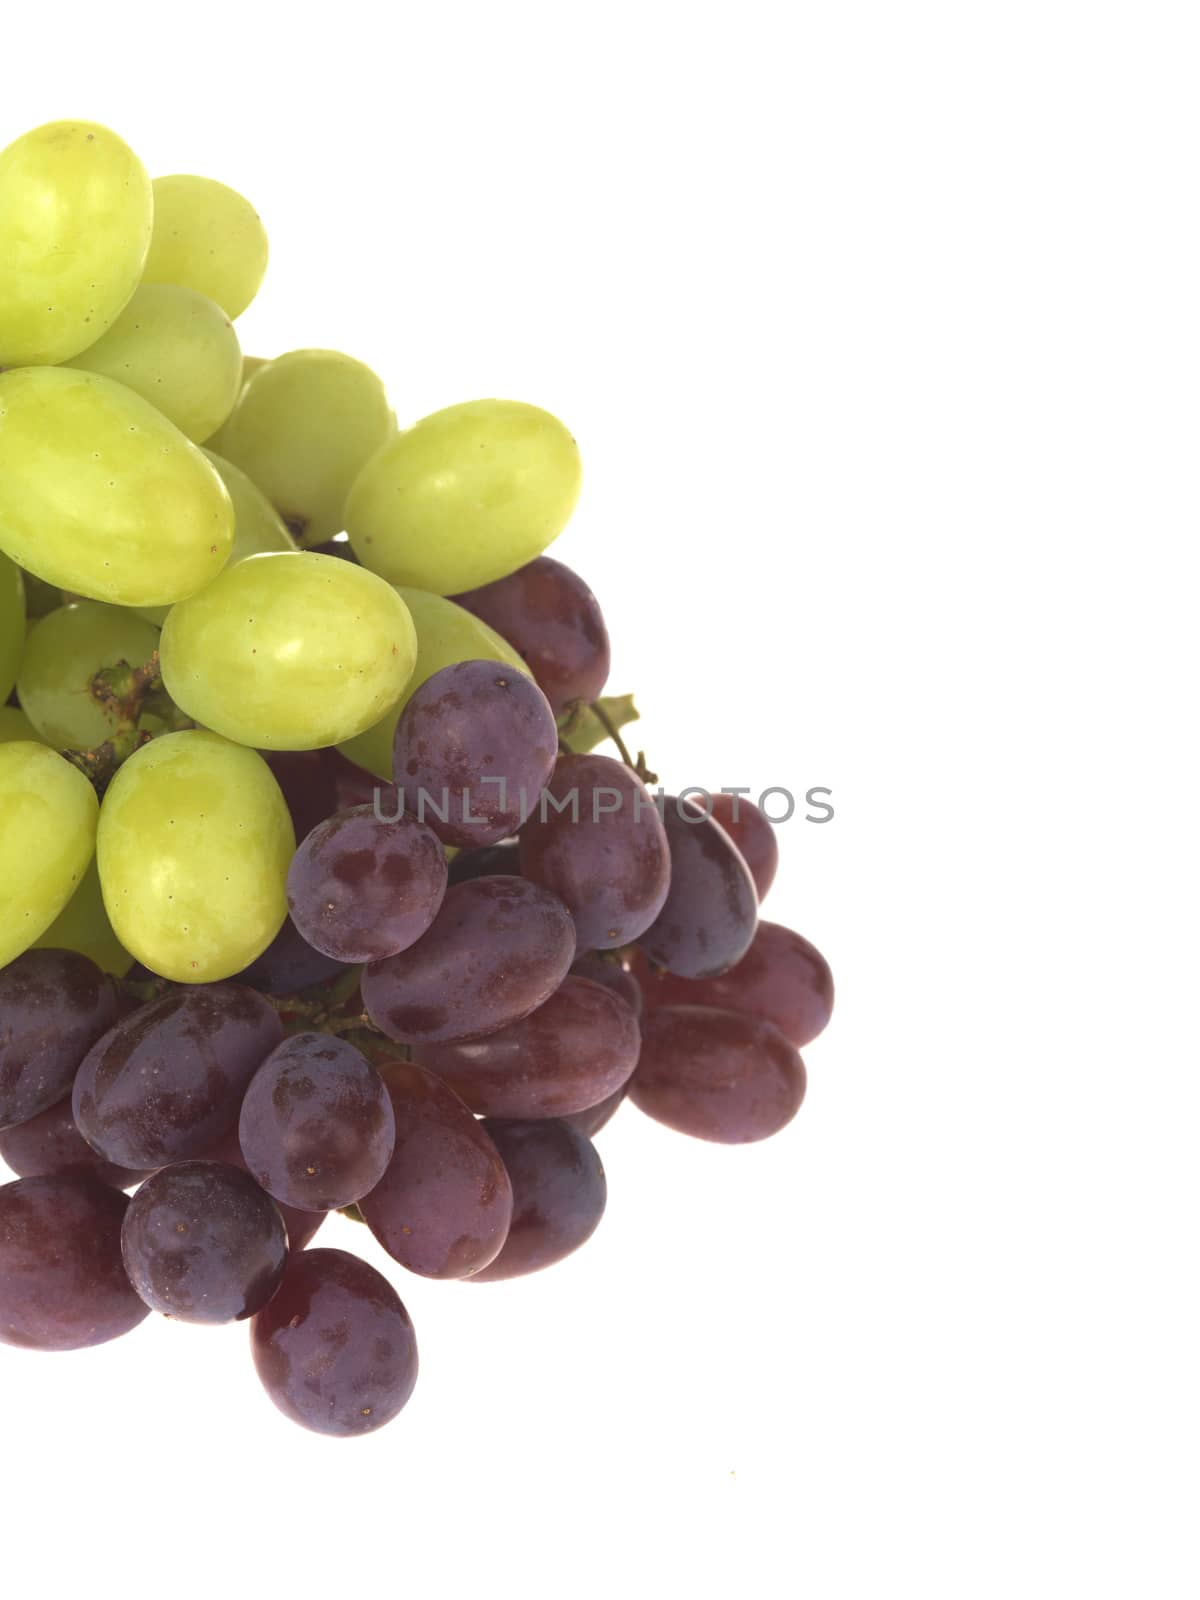 Bunch of Green and Red Grapes Isolated White Background